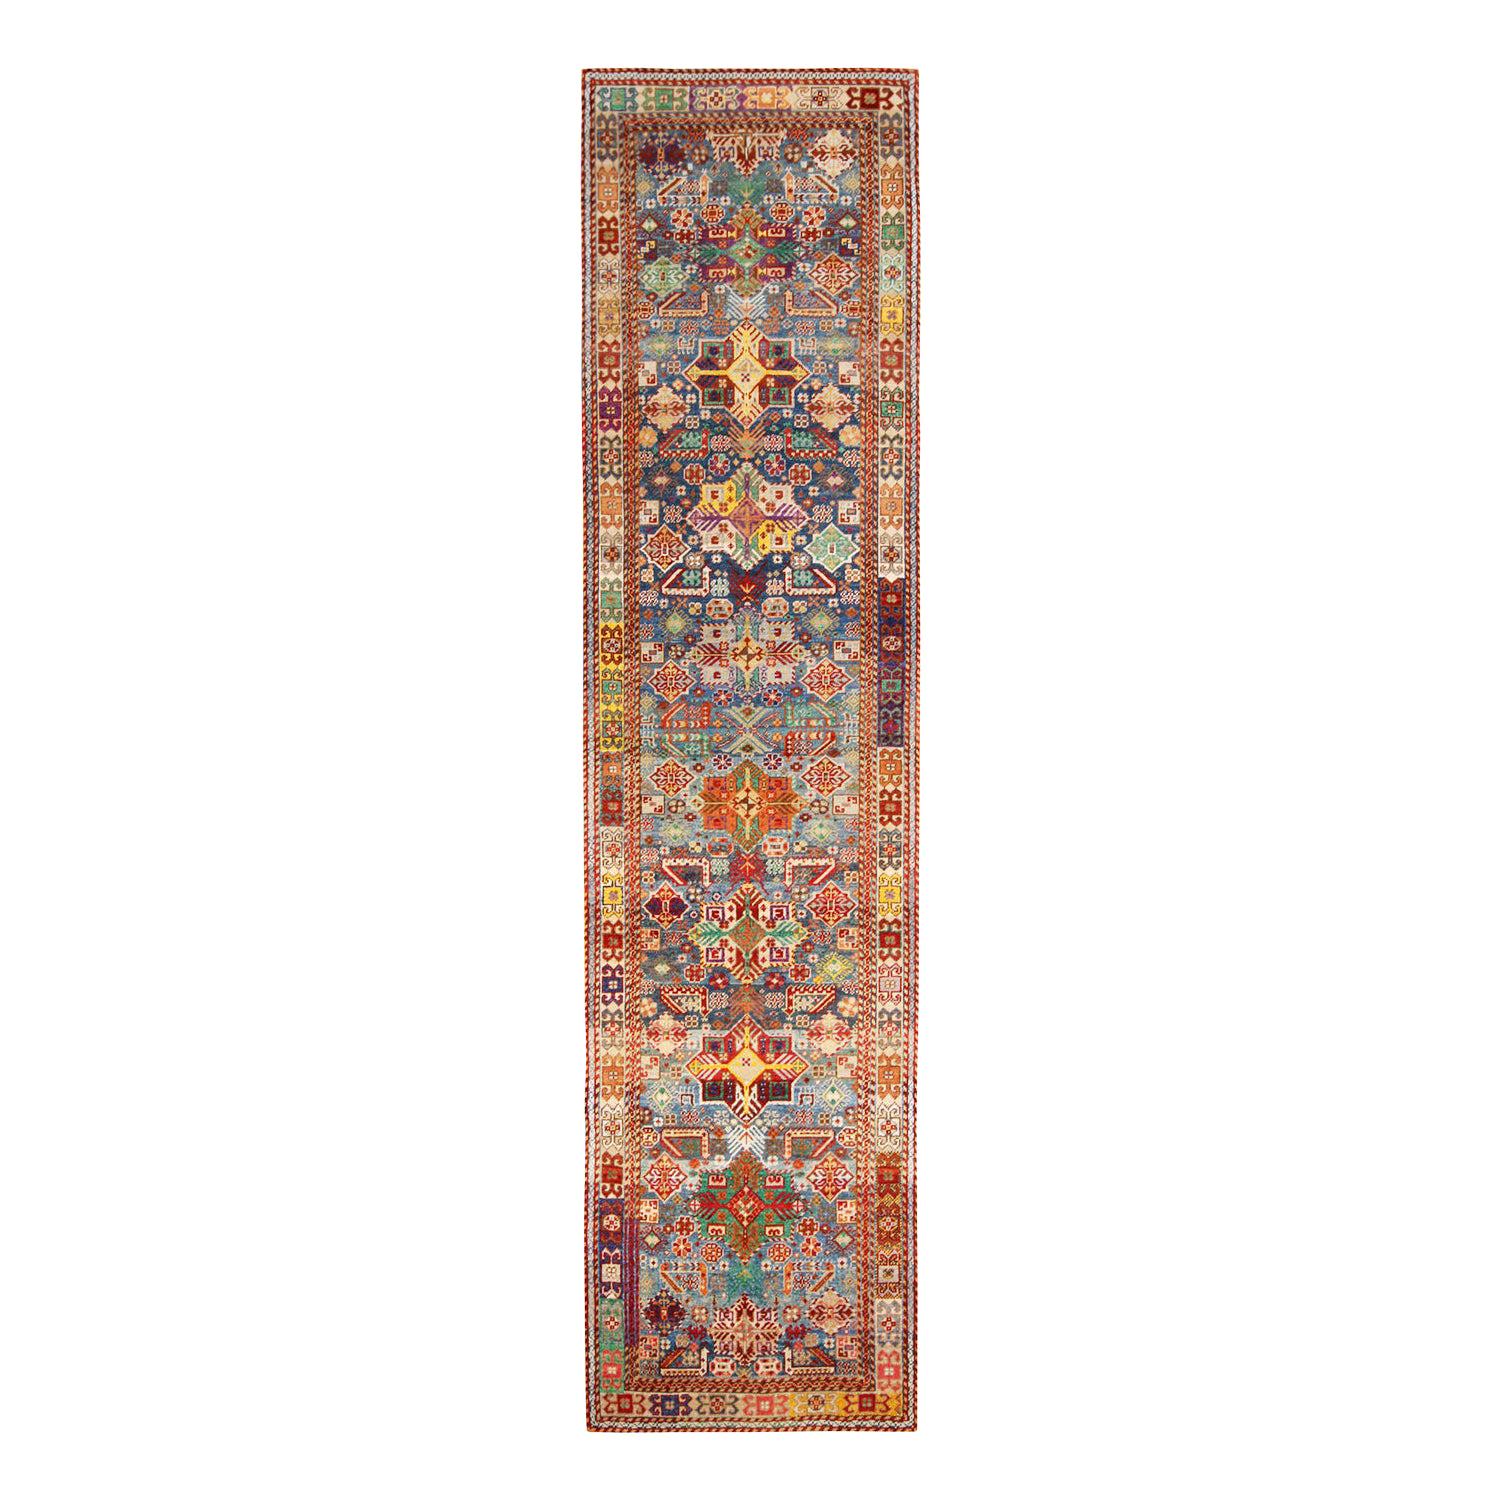 Contemporary Rajasthan Tribal Red and Blue Multi-Color Wool Rug